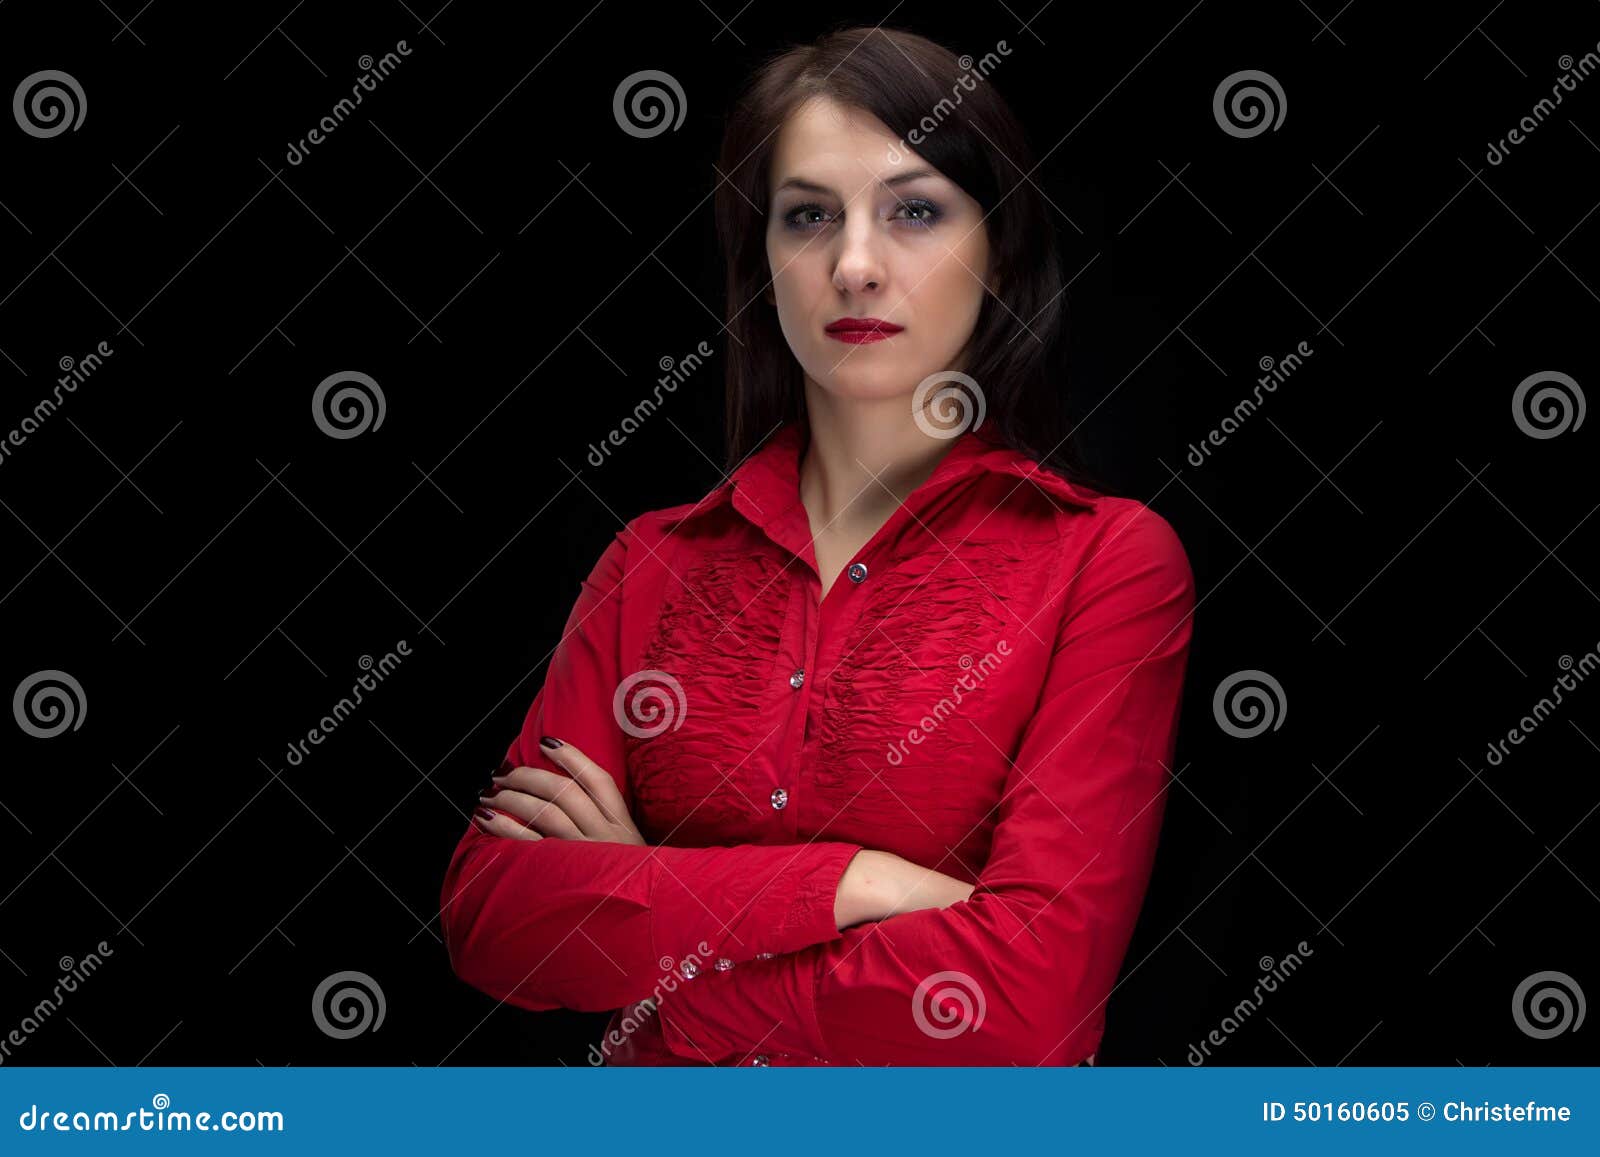 Photo of Woman in Red Shirt with Arms Crossed Stock Image - Image of ...